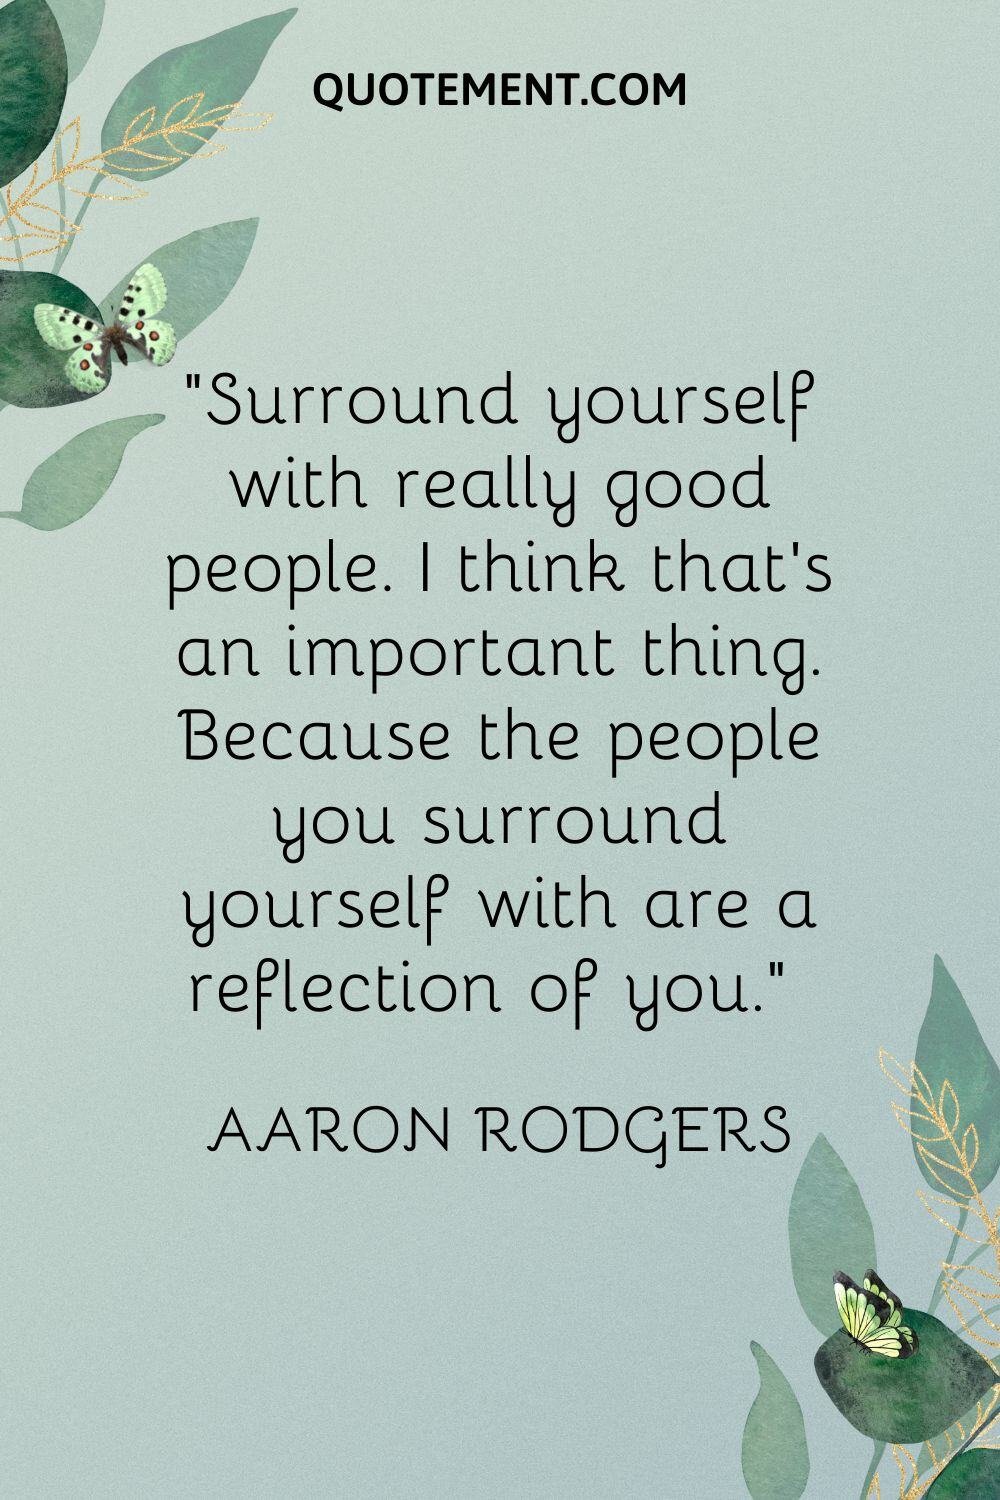 Surround yourself with really good people